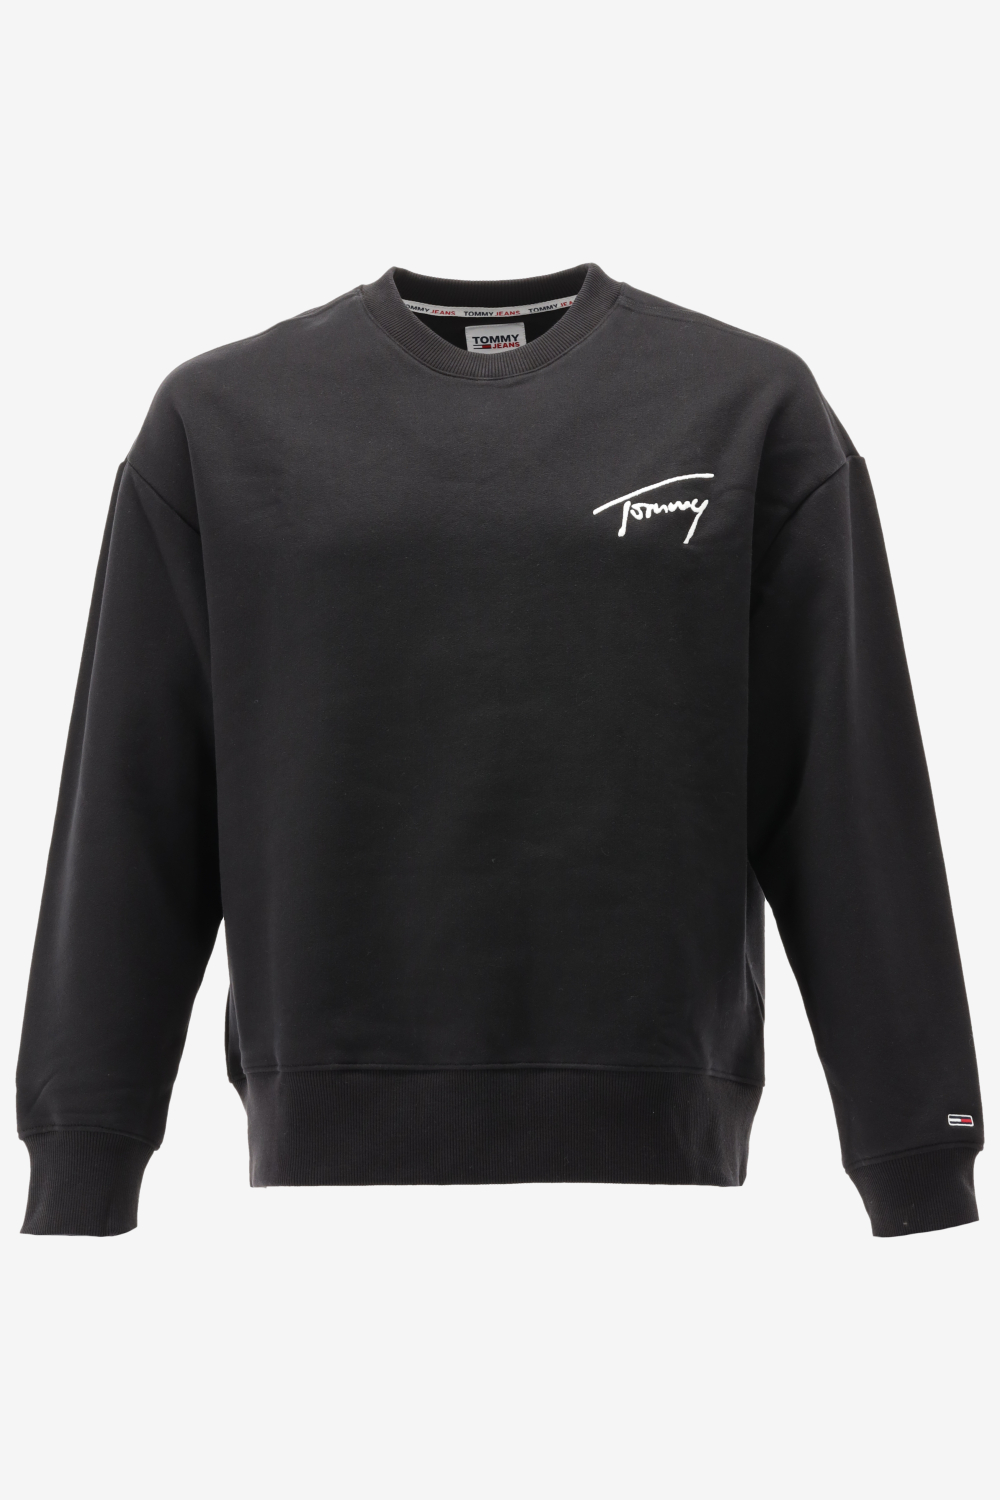 Tommy Hilfiger Sweater TJM TOMMY SIGNATURE